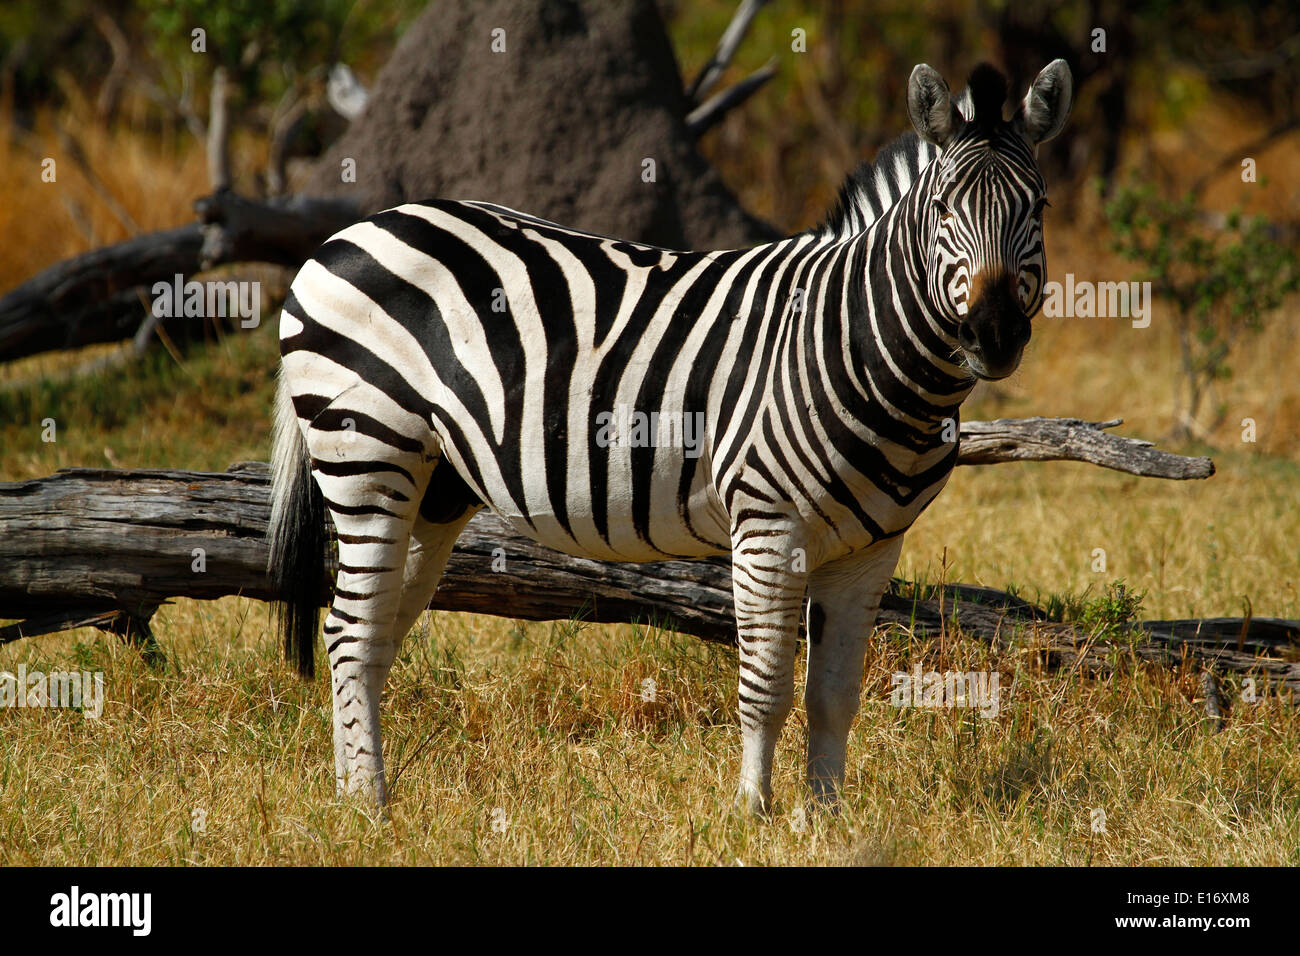 A fine example of a Burchell's Zebra Stallion in the African bush veld of Savuti Marsh Botswana. Plains game for the big cats. Stock Photo